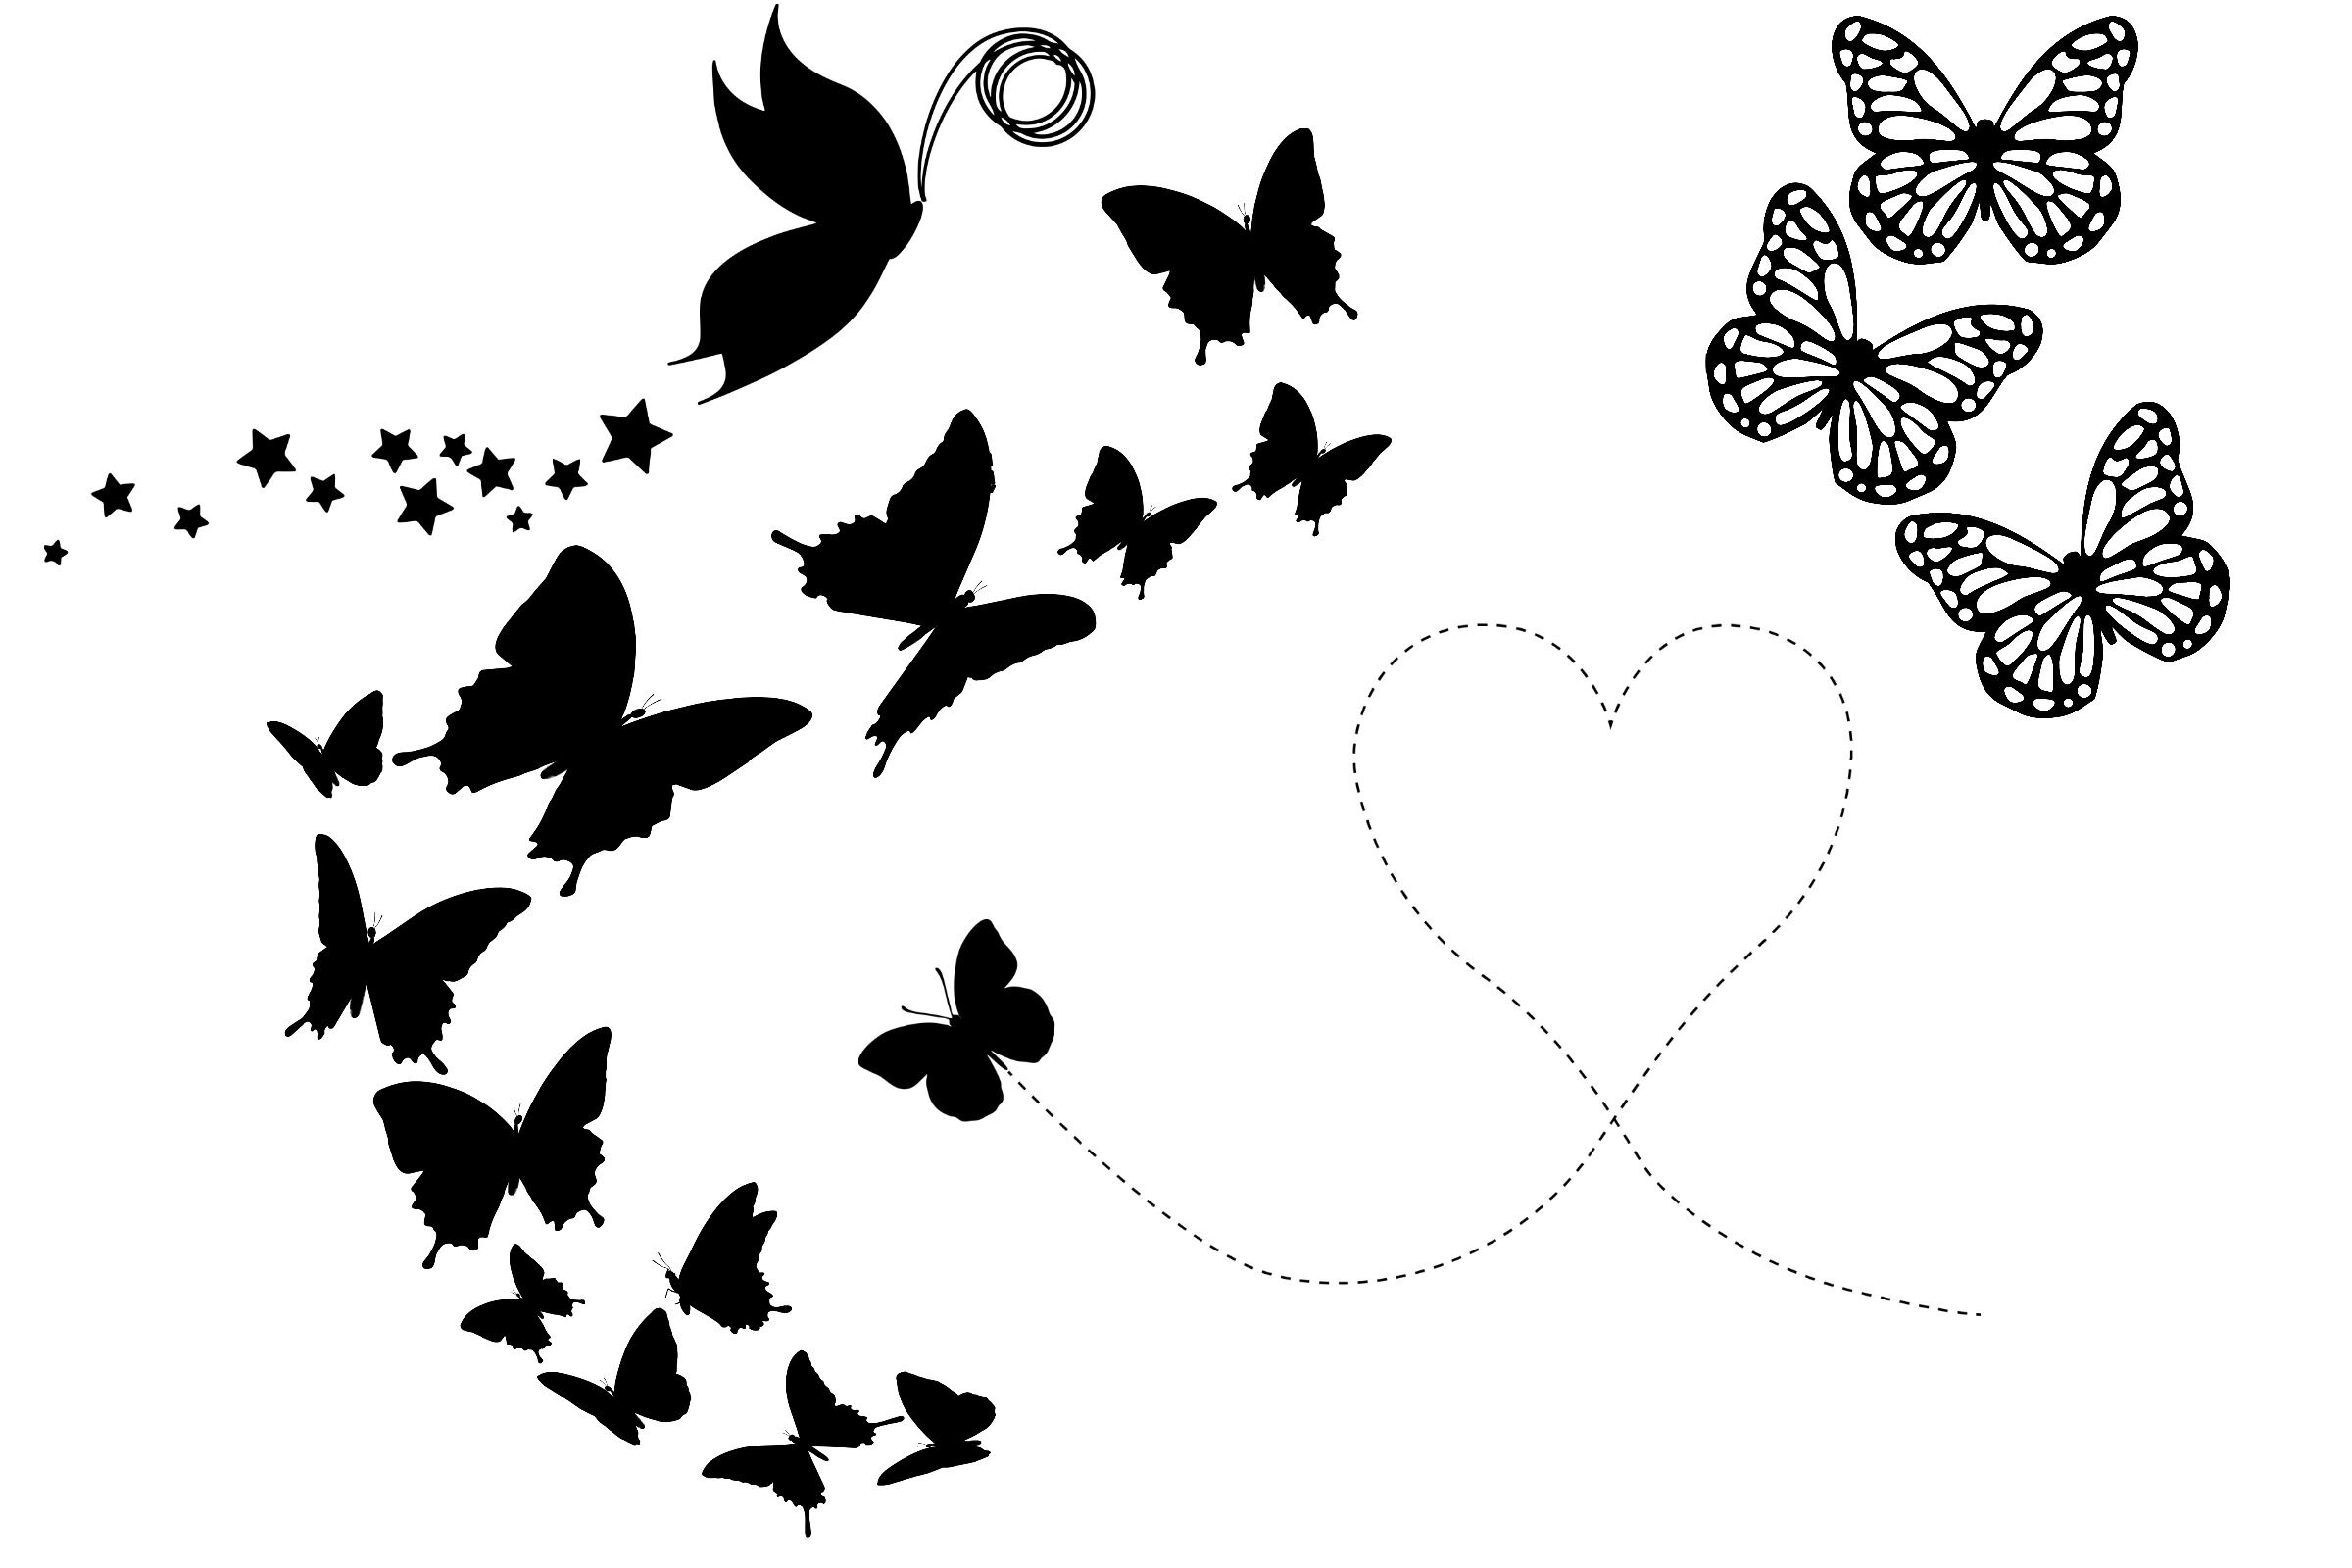 Download Silhouette Free Sunflower Svg Images.